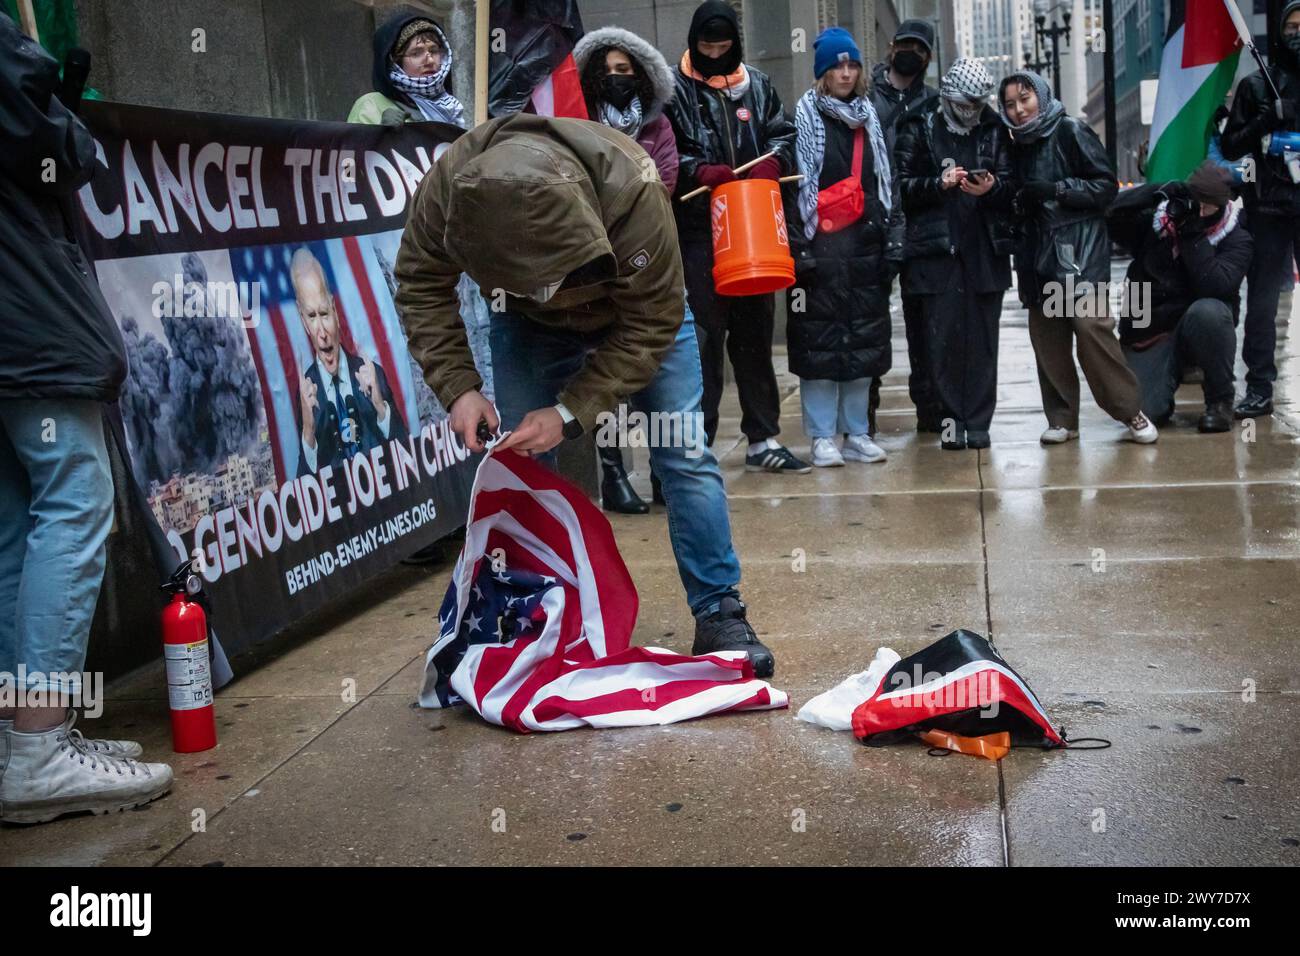 Marine corps veteran Zachary Kam burns a US flag at Chicago City Hall during a rally to 'Cancel the DNC'. Stock Photo